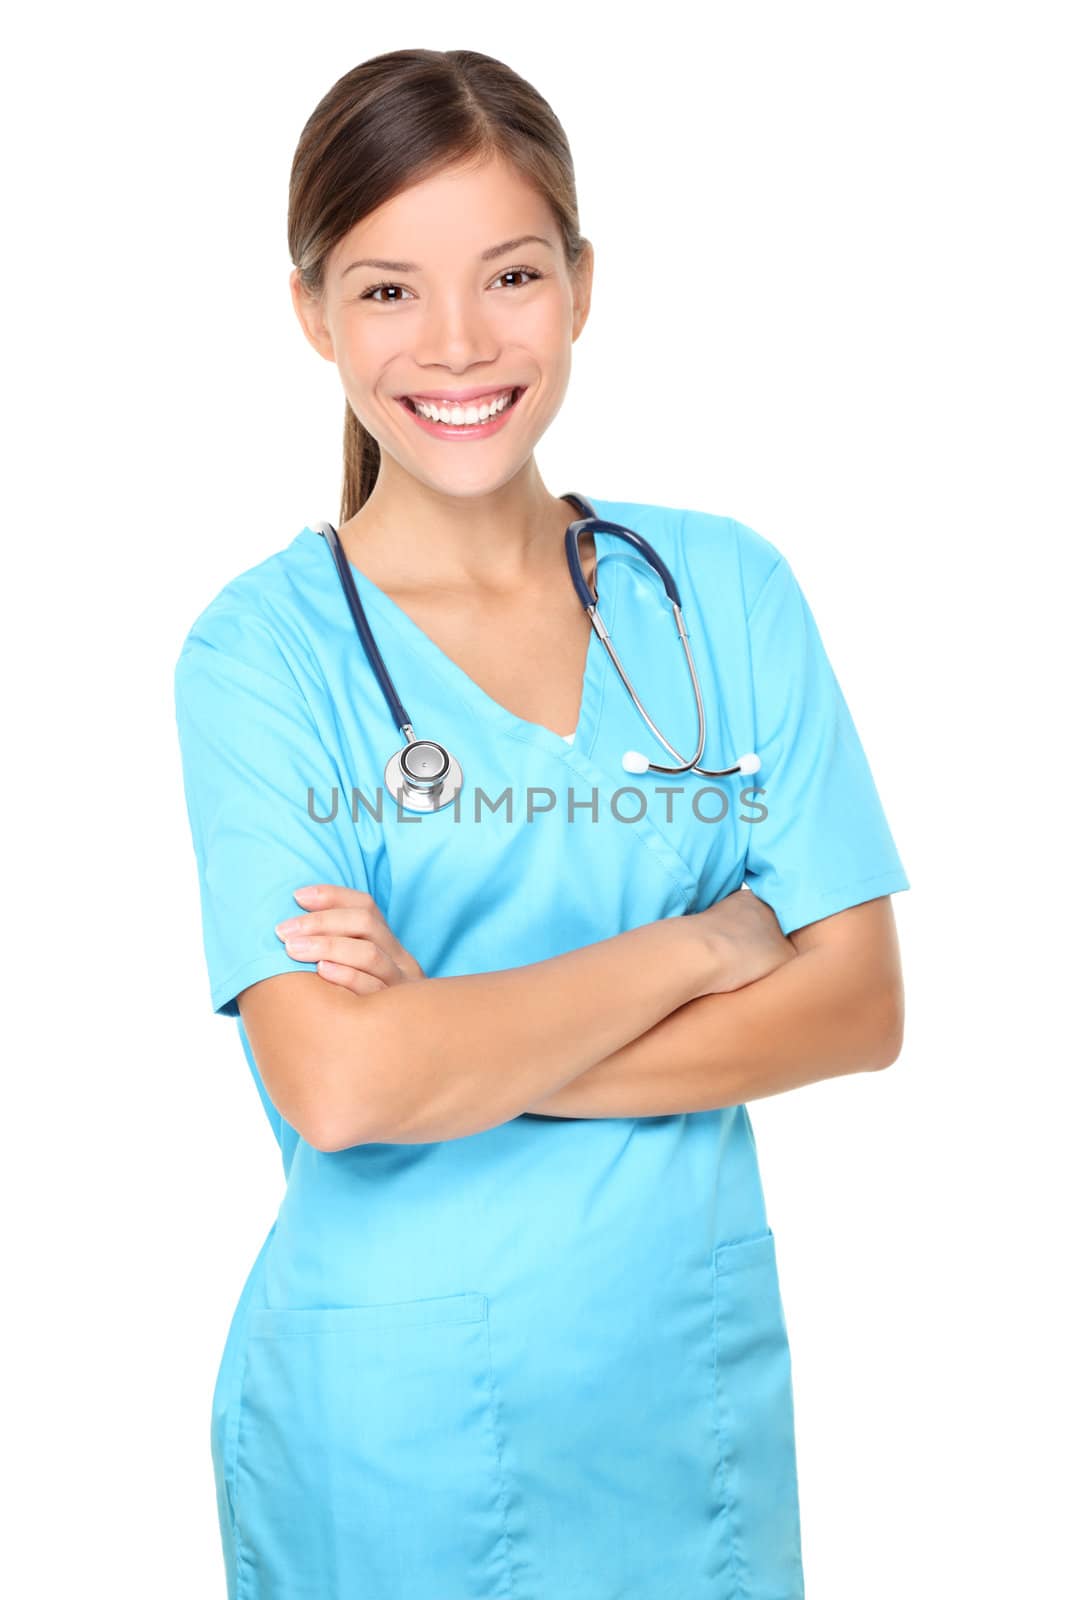 Nurse. Portrait on young woman nurse / medical student in her mid 20s. Isolated on white background. Mixed Asian / Caucasian model.